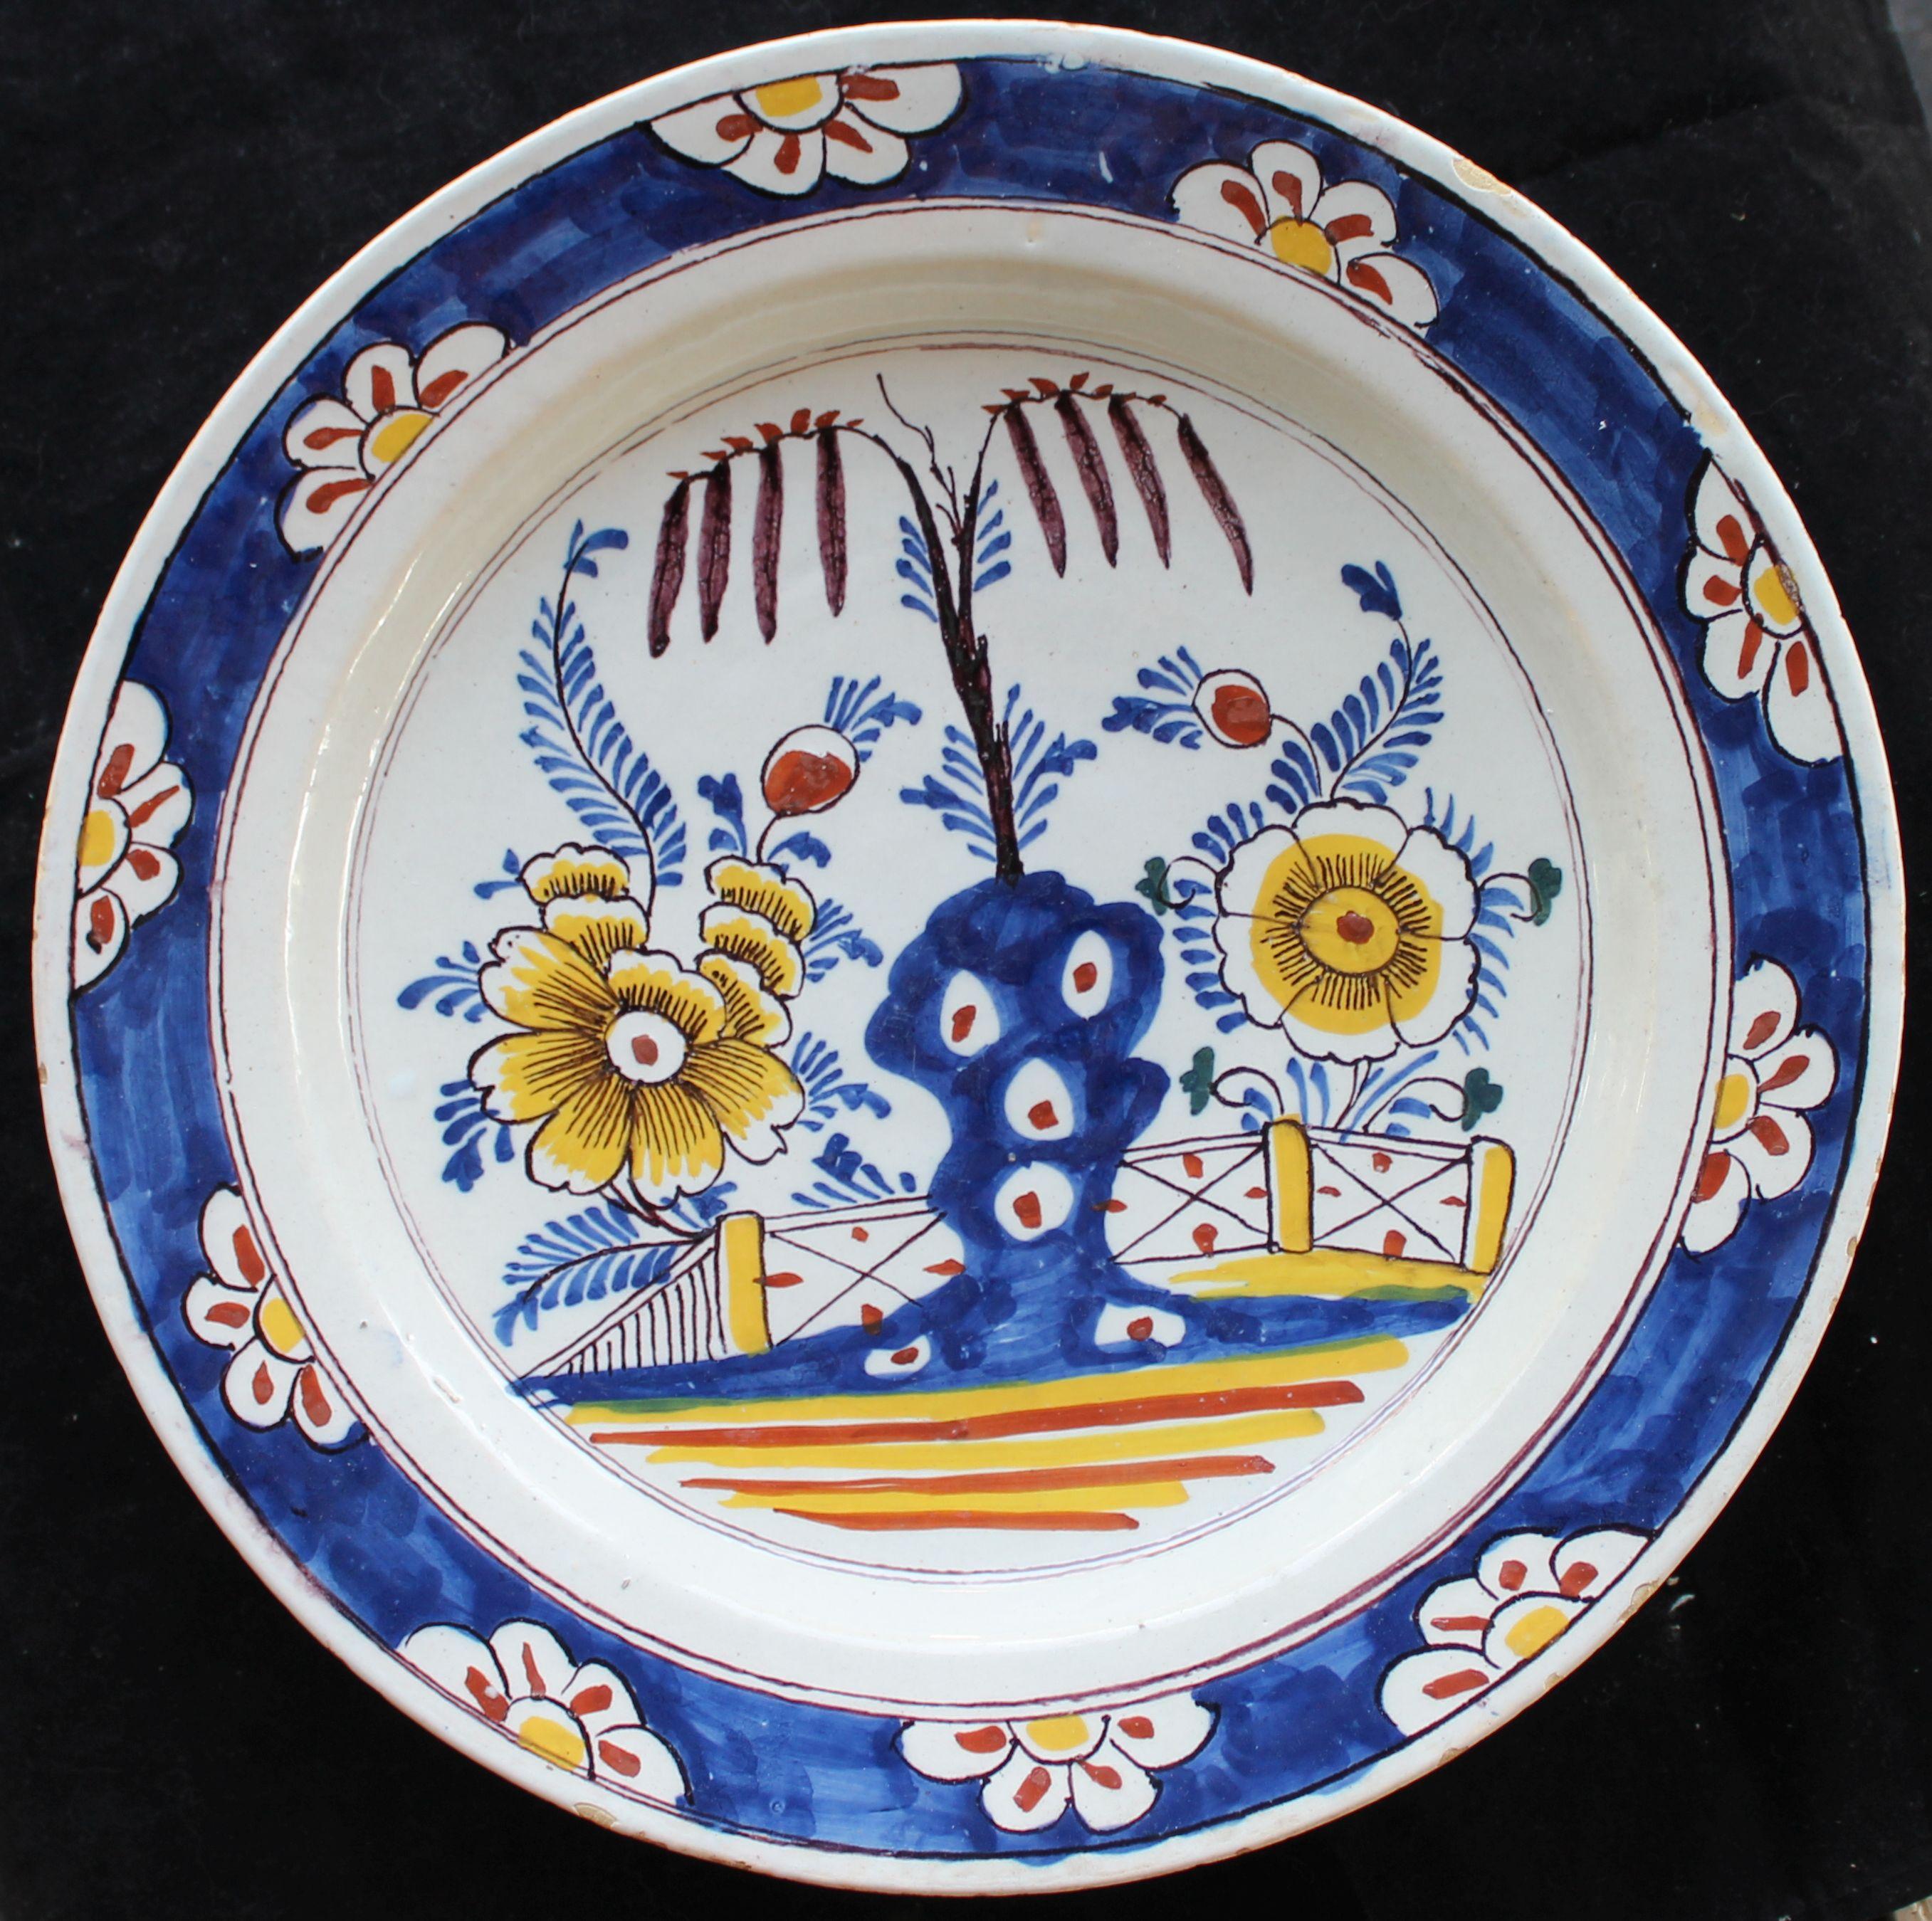 Dutch delftware charger, 1750-1800.
The decoration is a stylised version of an oriental garden on 17th century Chinese porcelain.
Dimensions of the charger: diameter of 12.2 inch / 31 cm
The condition is very good, with beautiful clear glaze.